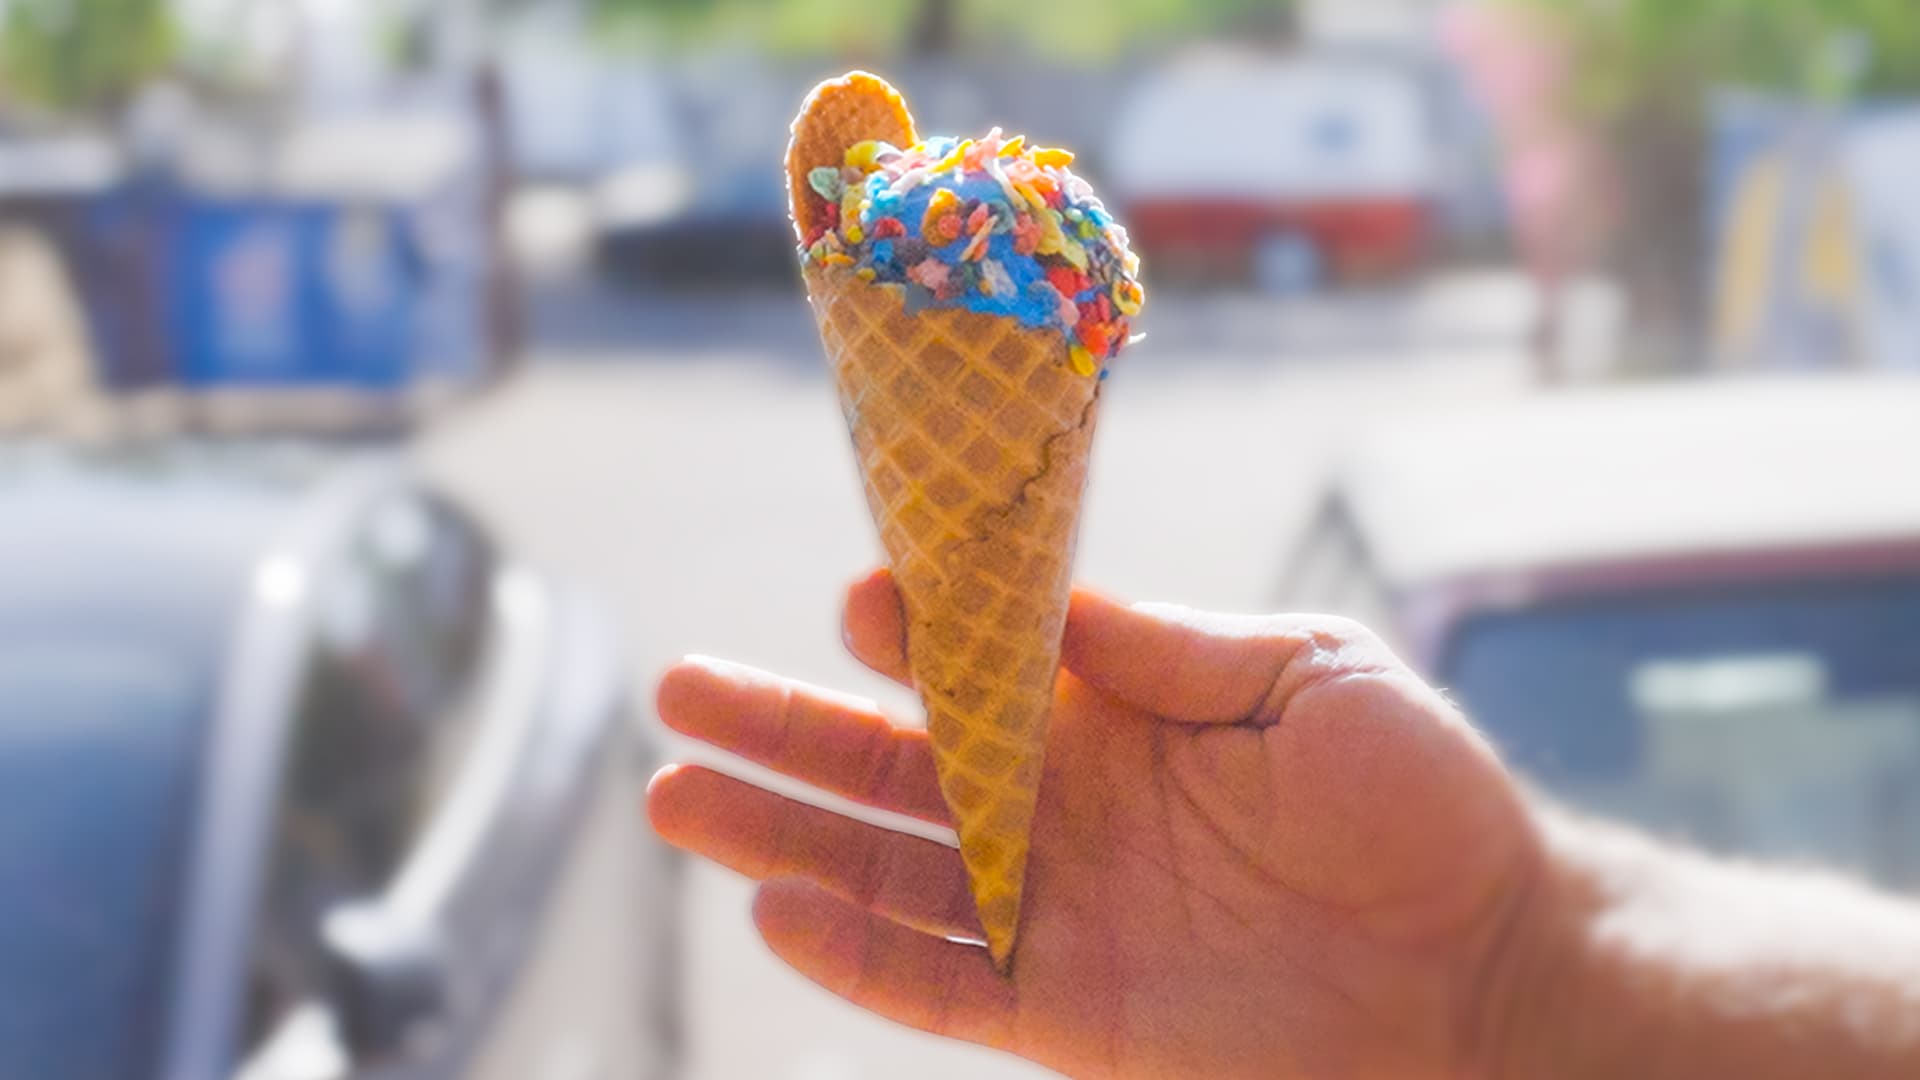 I bought an ice cream shop—now it brings in $1.2 million a year